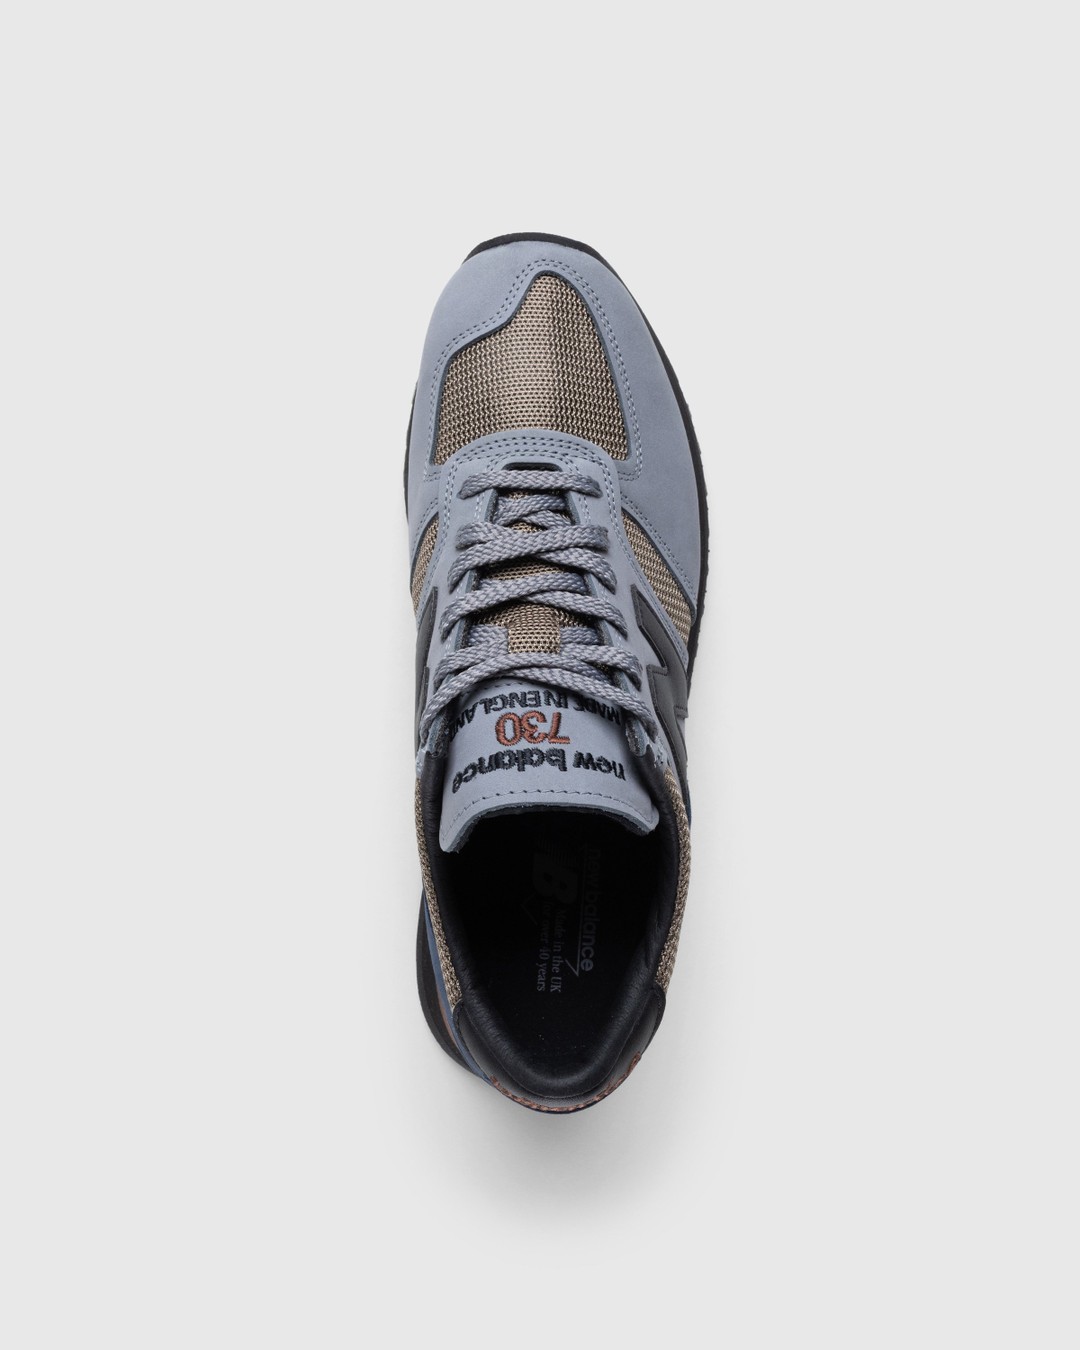 New Balance – M730INV Grey/Navy - Low Top Sneakers - Grey - Image 5